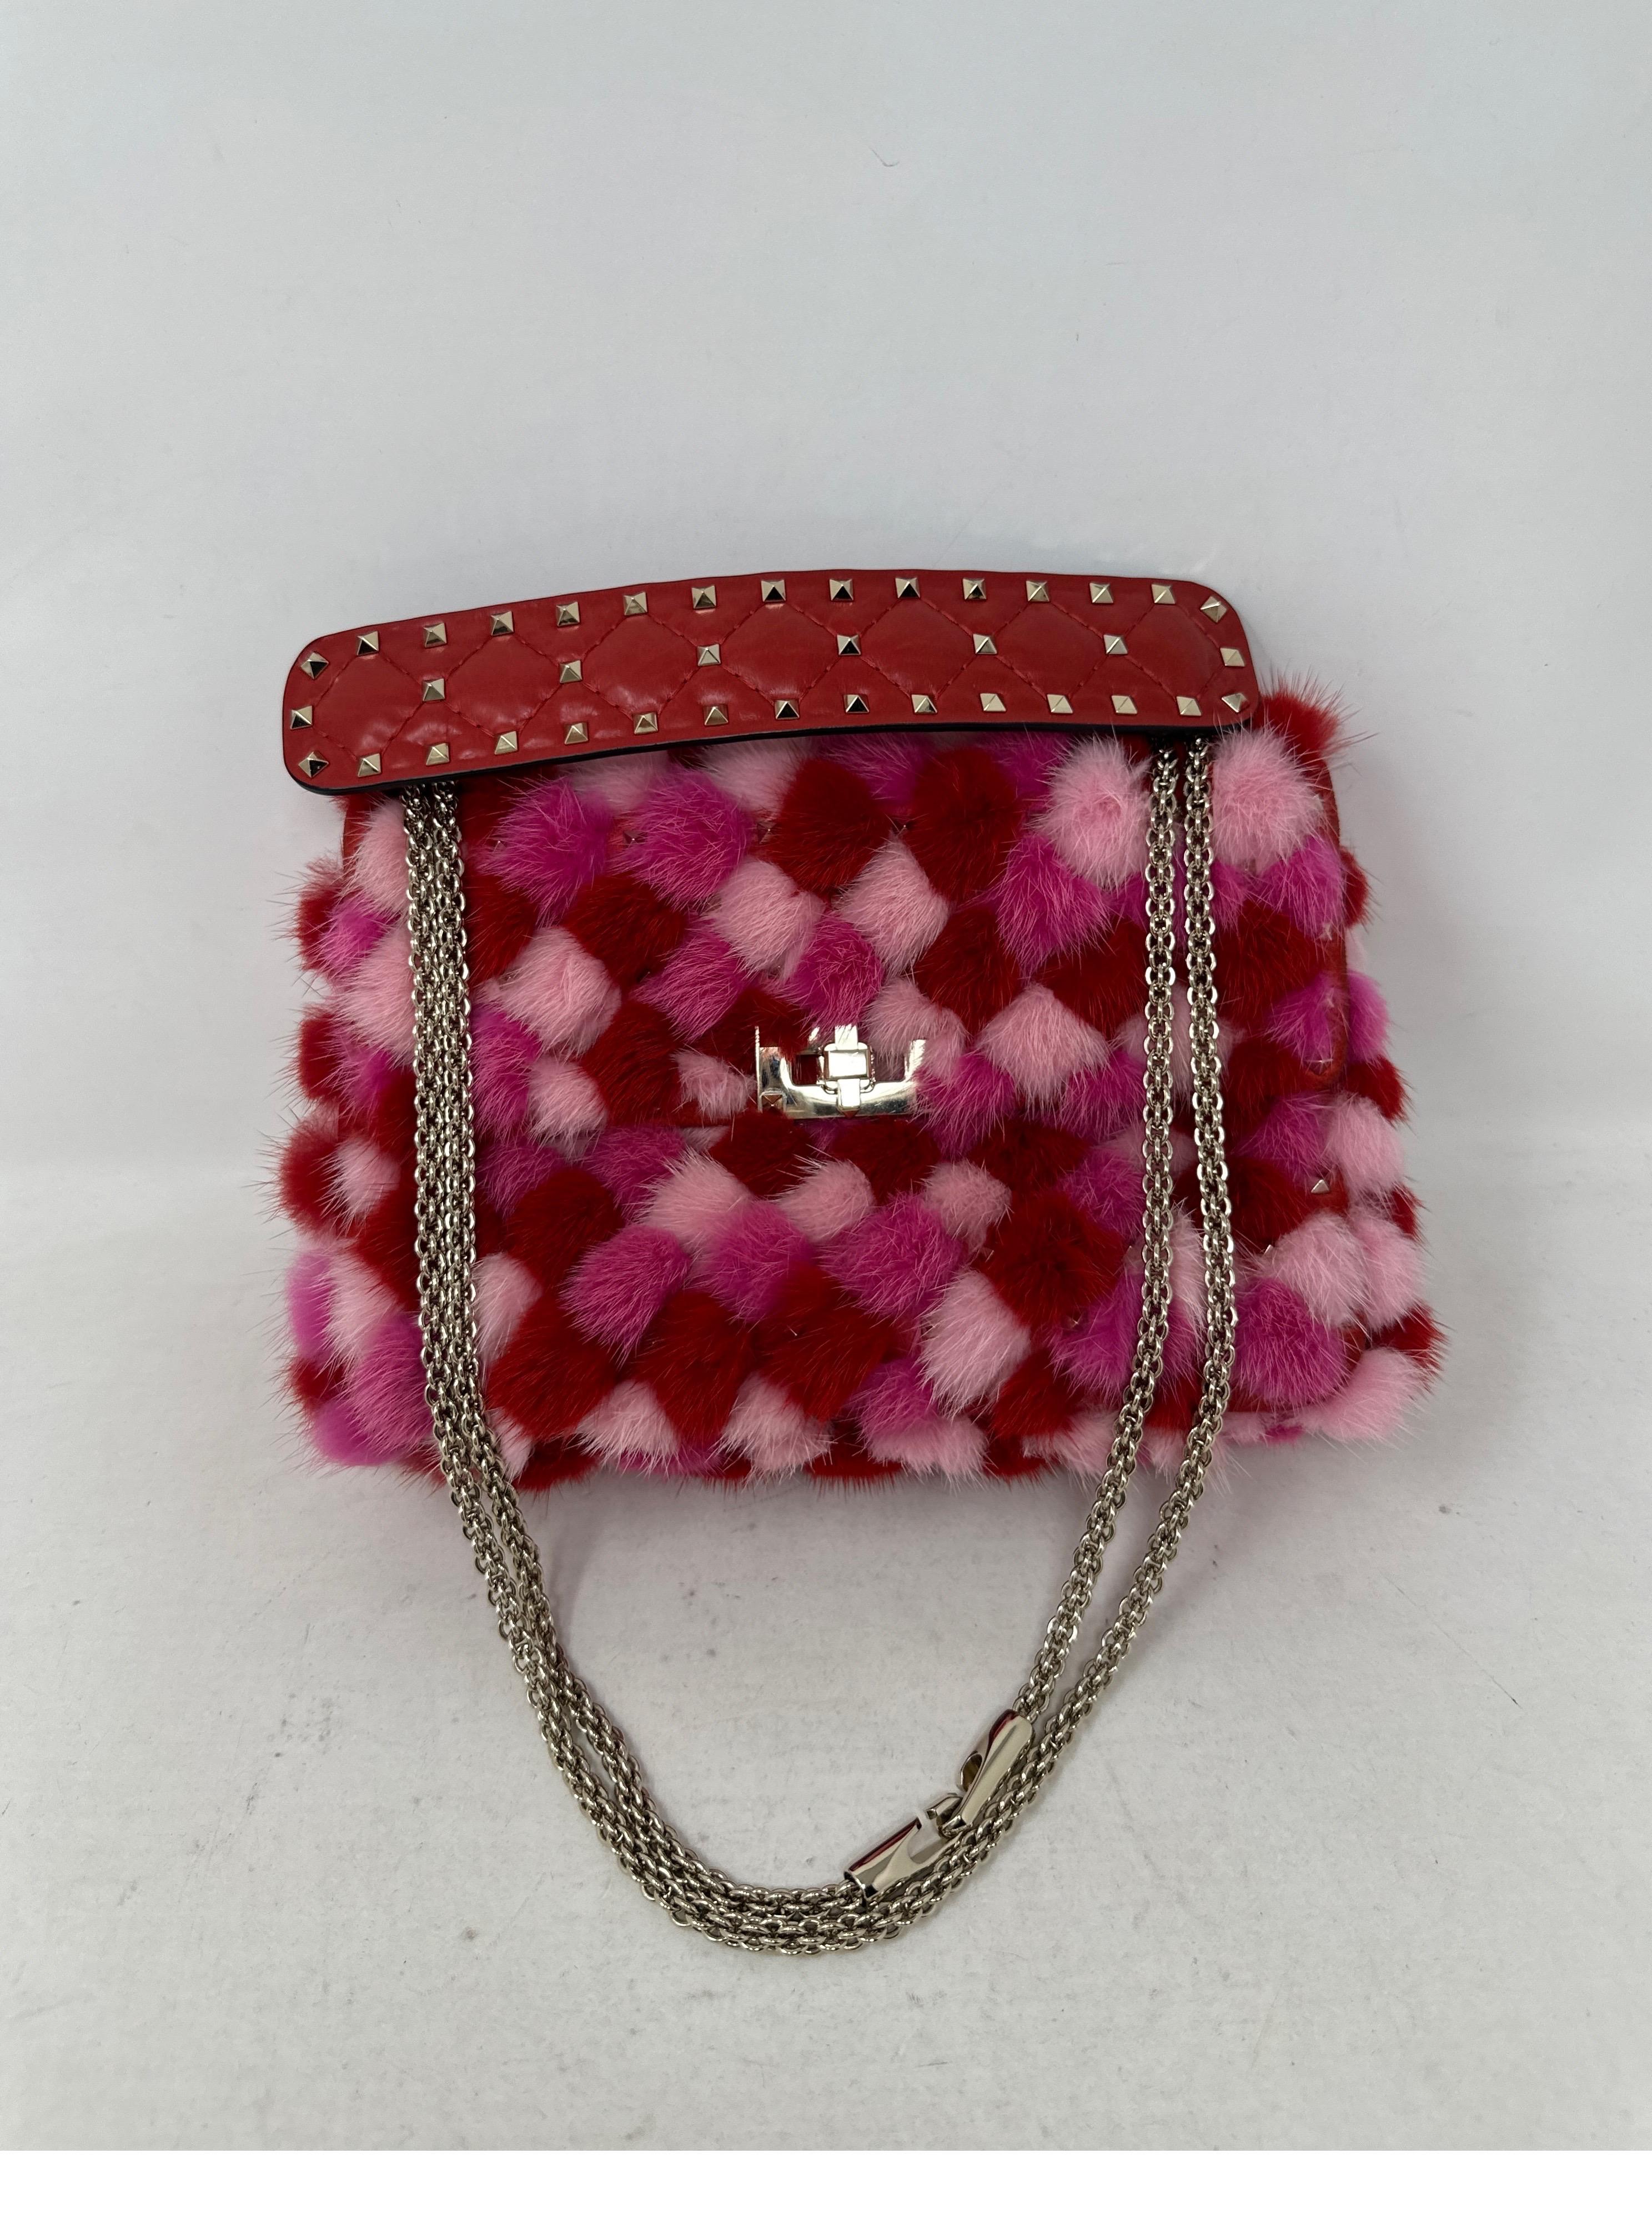 Valentino Multi-color pink mink bag. Different pink and red shades of mink fur. Handle all leather with studs. Rare and limited bag. Was over $7500 plus tax. Soft yellow gold hardware. Bag can be worn as crossbody or top handle bag. Interior all red